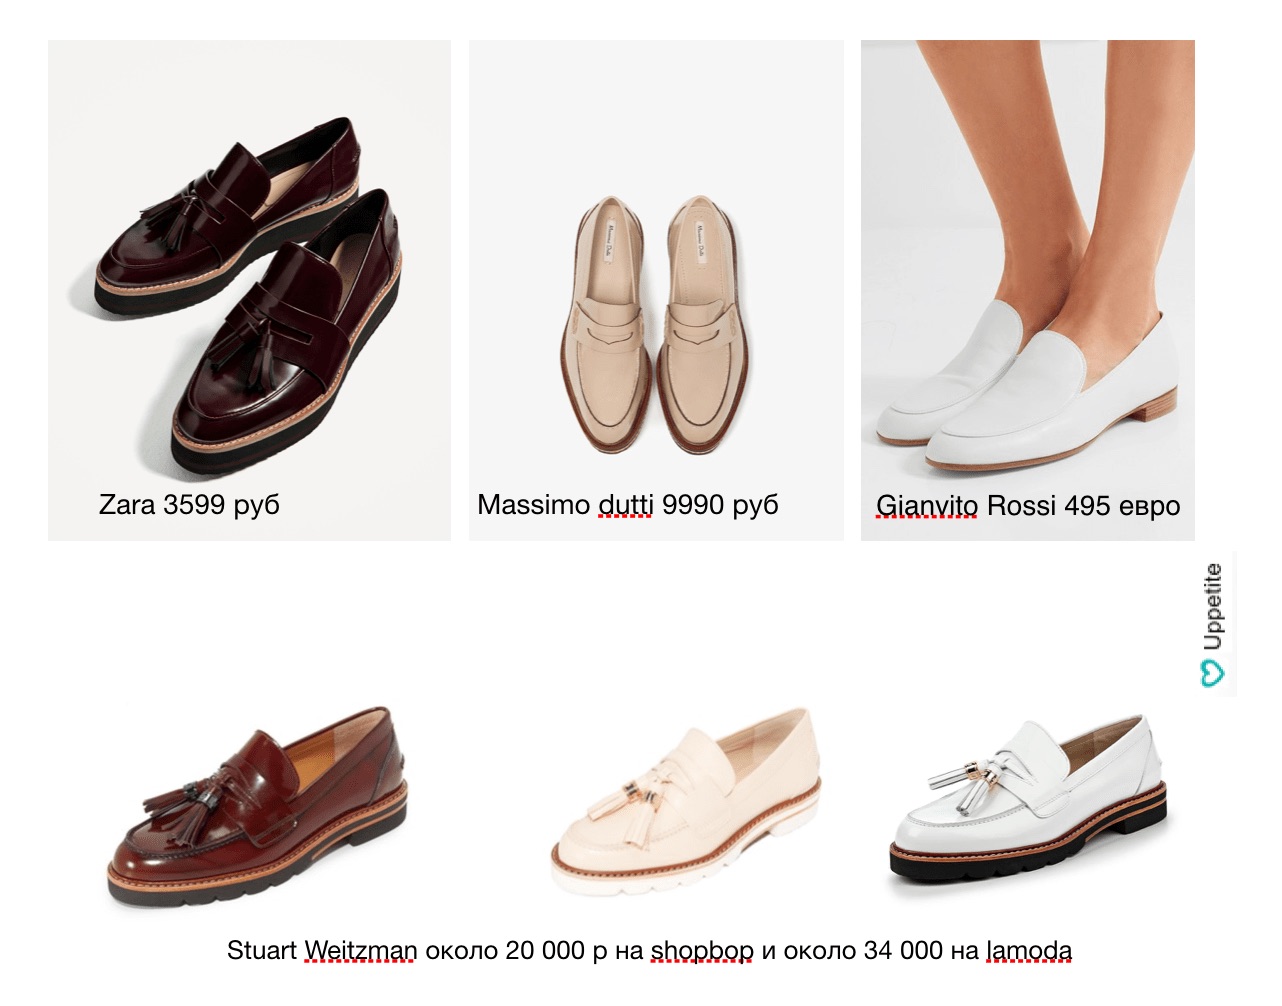 Shoes for little women: which one to choose and where to buy depending on the season